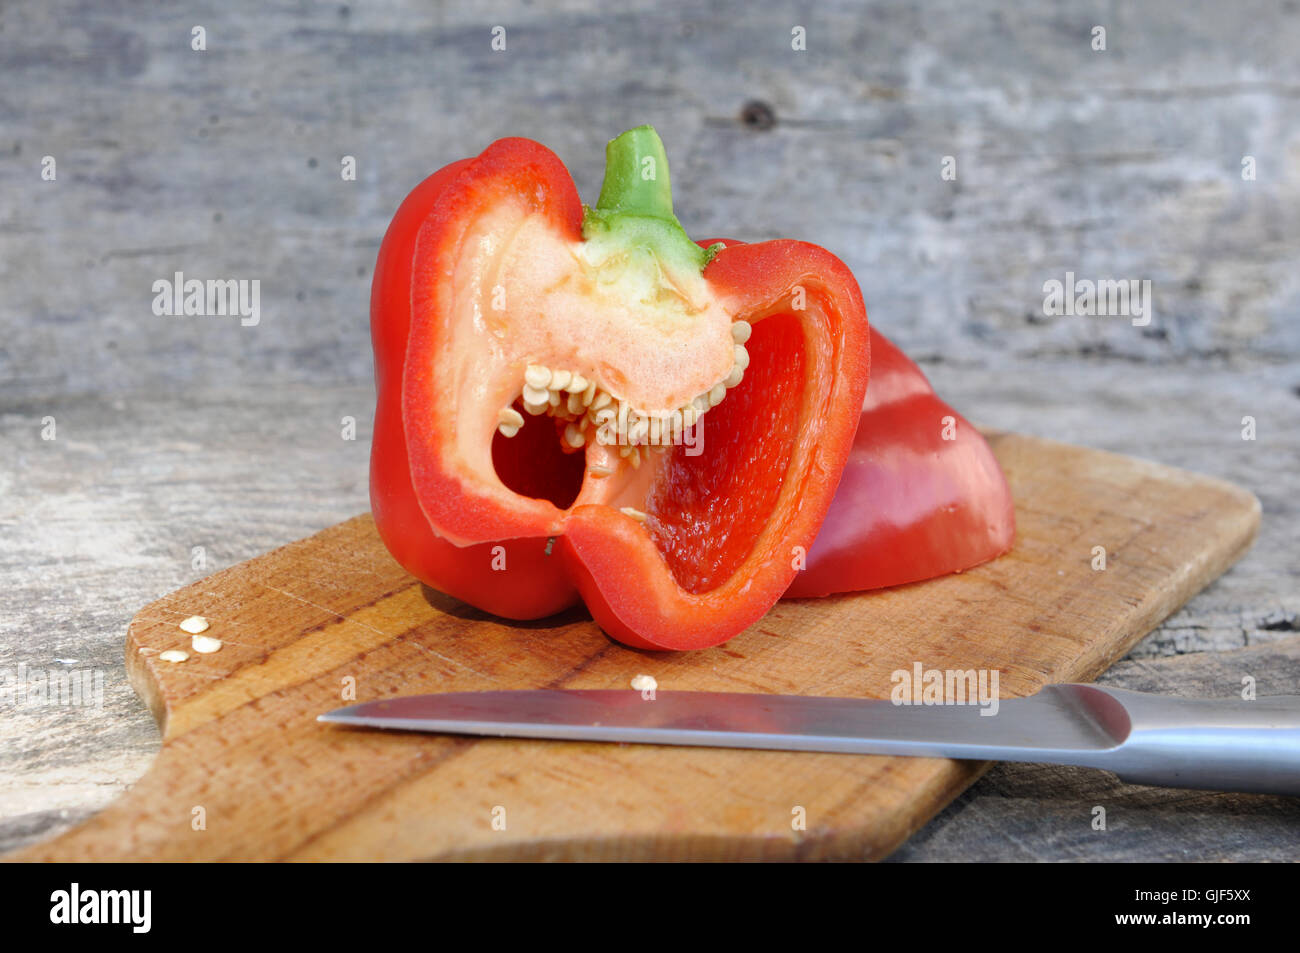 red pepper cut in half on board with knife Stock Photo